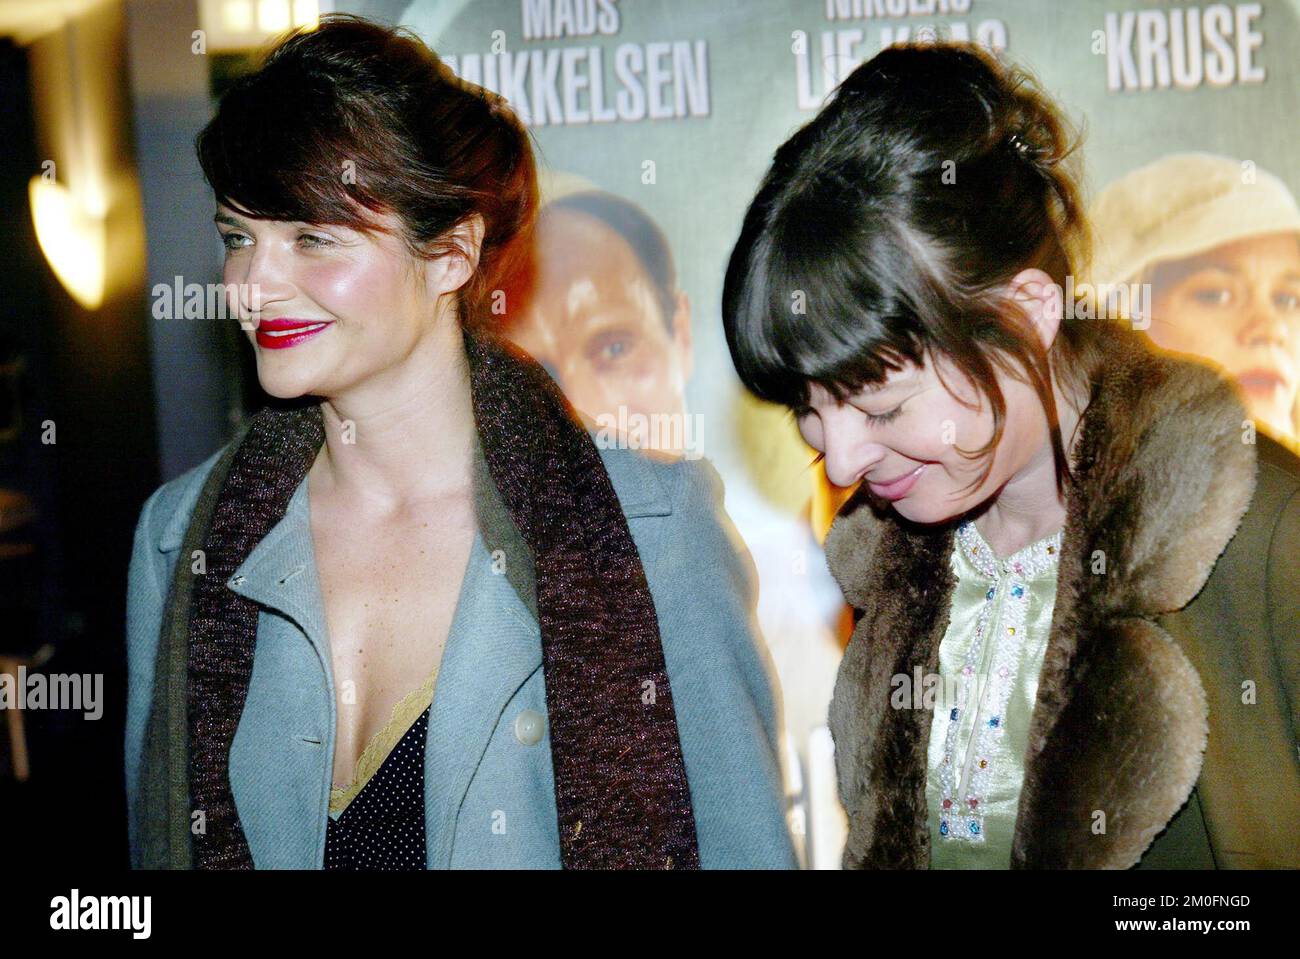 PA PHOTOS/POLFOTO - UK USE ONLY: Danish super model Helena Christensen and her girlfriend attending the movie premiere of the new Danish movie 'De gronne slagtere'. According to rumours she is romantically involved with one the stars from the movie, Nicolaj Lie Kaas. 'No comments, talk to my agent', was the only comment she gave the press. Stock Photo